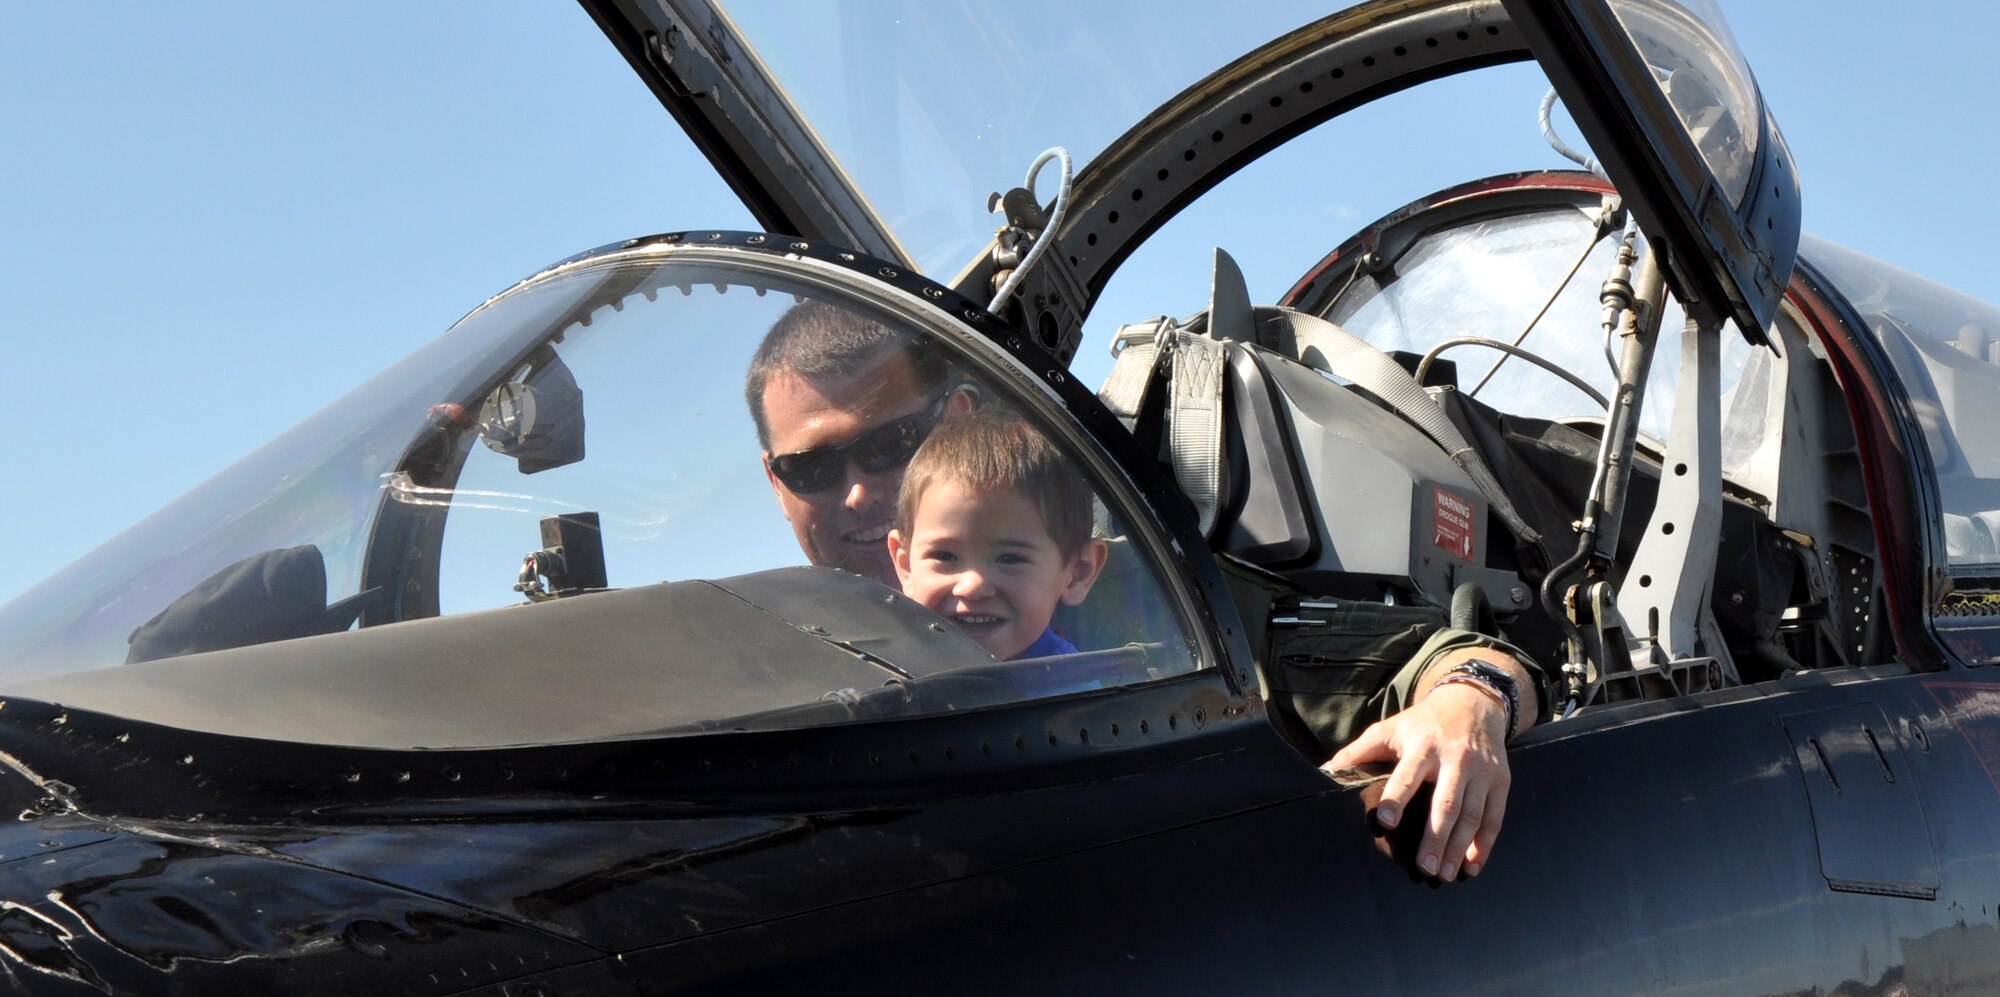 A child becomes a pilot-for-a-day in an Air Force T-38 Talon trainer aircraft during the National Championship Air Races at Stead Airport, Reno, Nev., Sept. 14, 2012. The Talon is primarily used by Air Education and Training Command for joint specialized undergraduate pilot training. (U.S. Air Force photo by Staff Sgt. Robert M. Trujillo/Released)